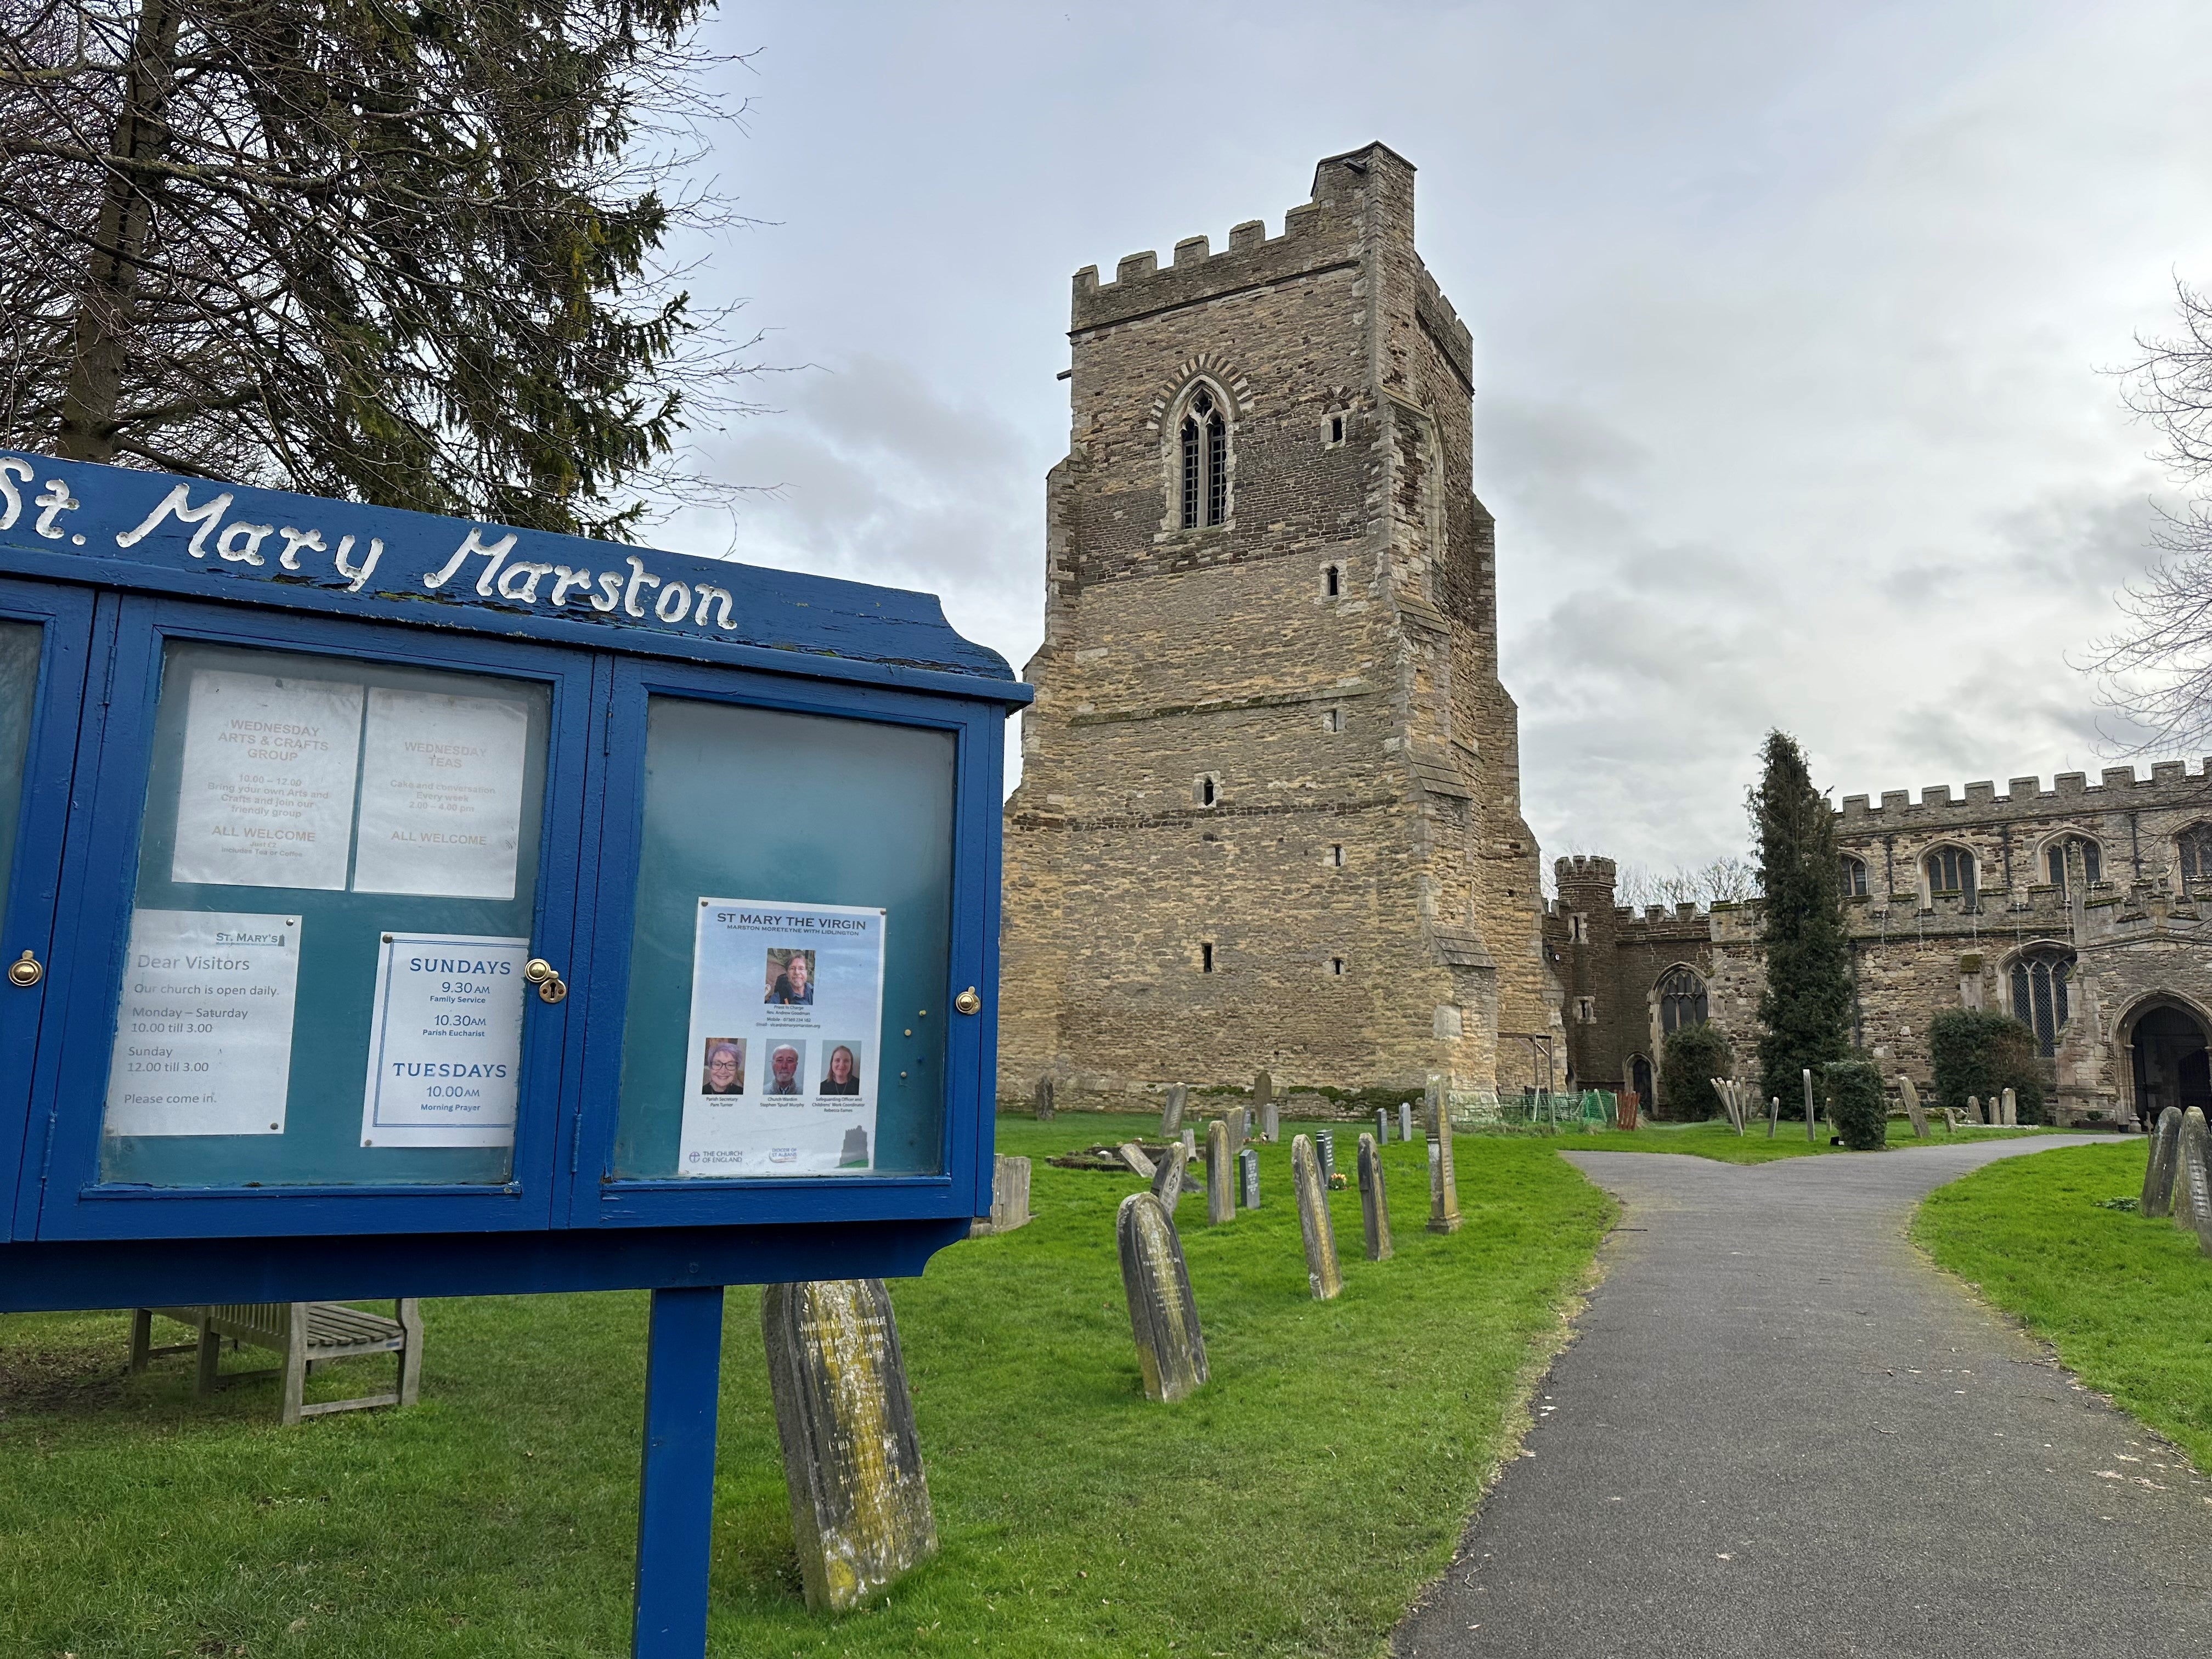 The bells of St Mary’s Church rang out for Captain Tom’s funeral, a two-minute walk from The Old Rectory